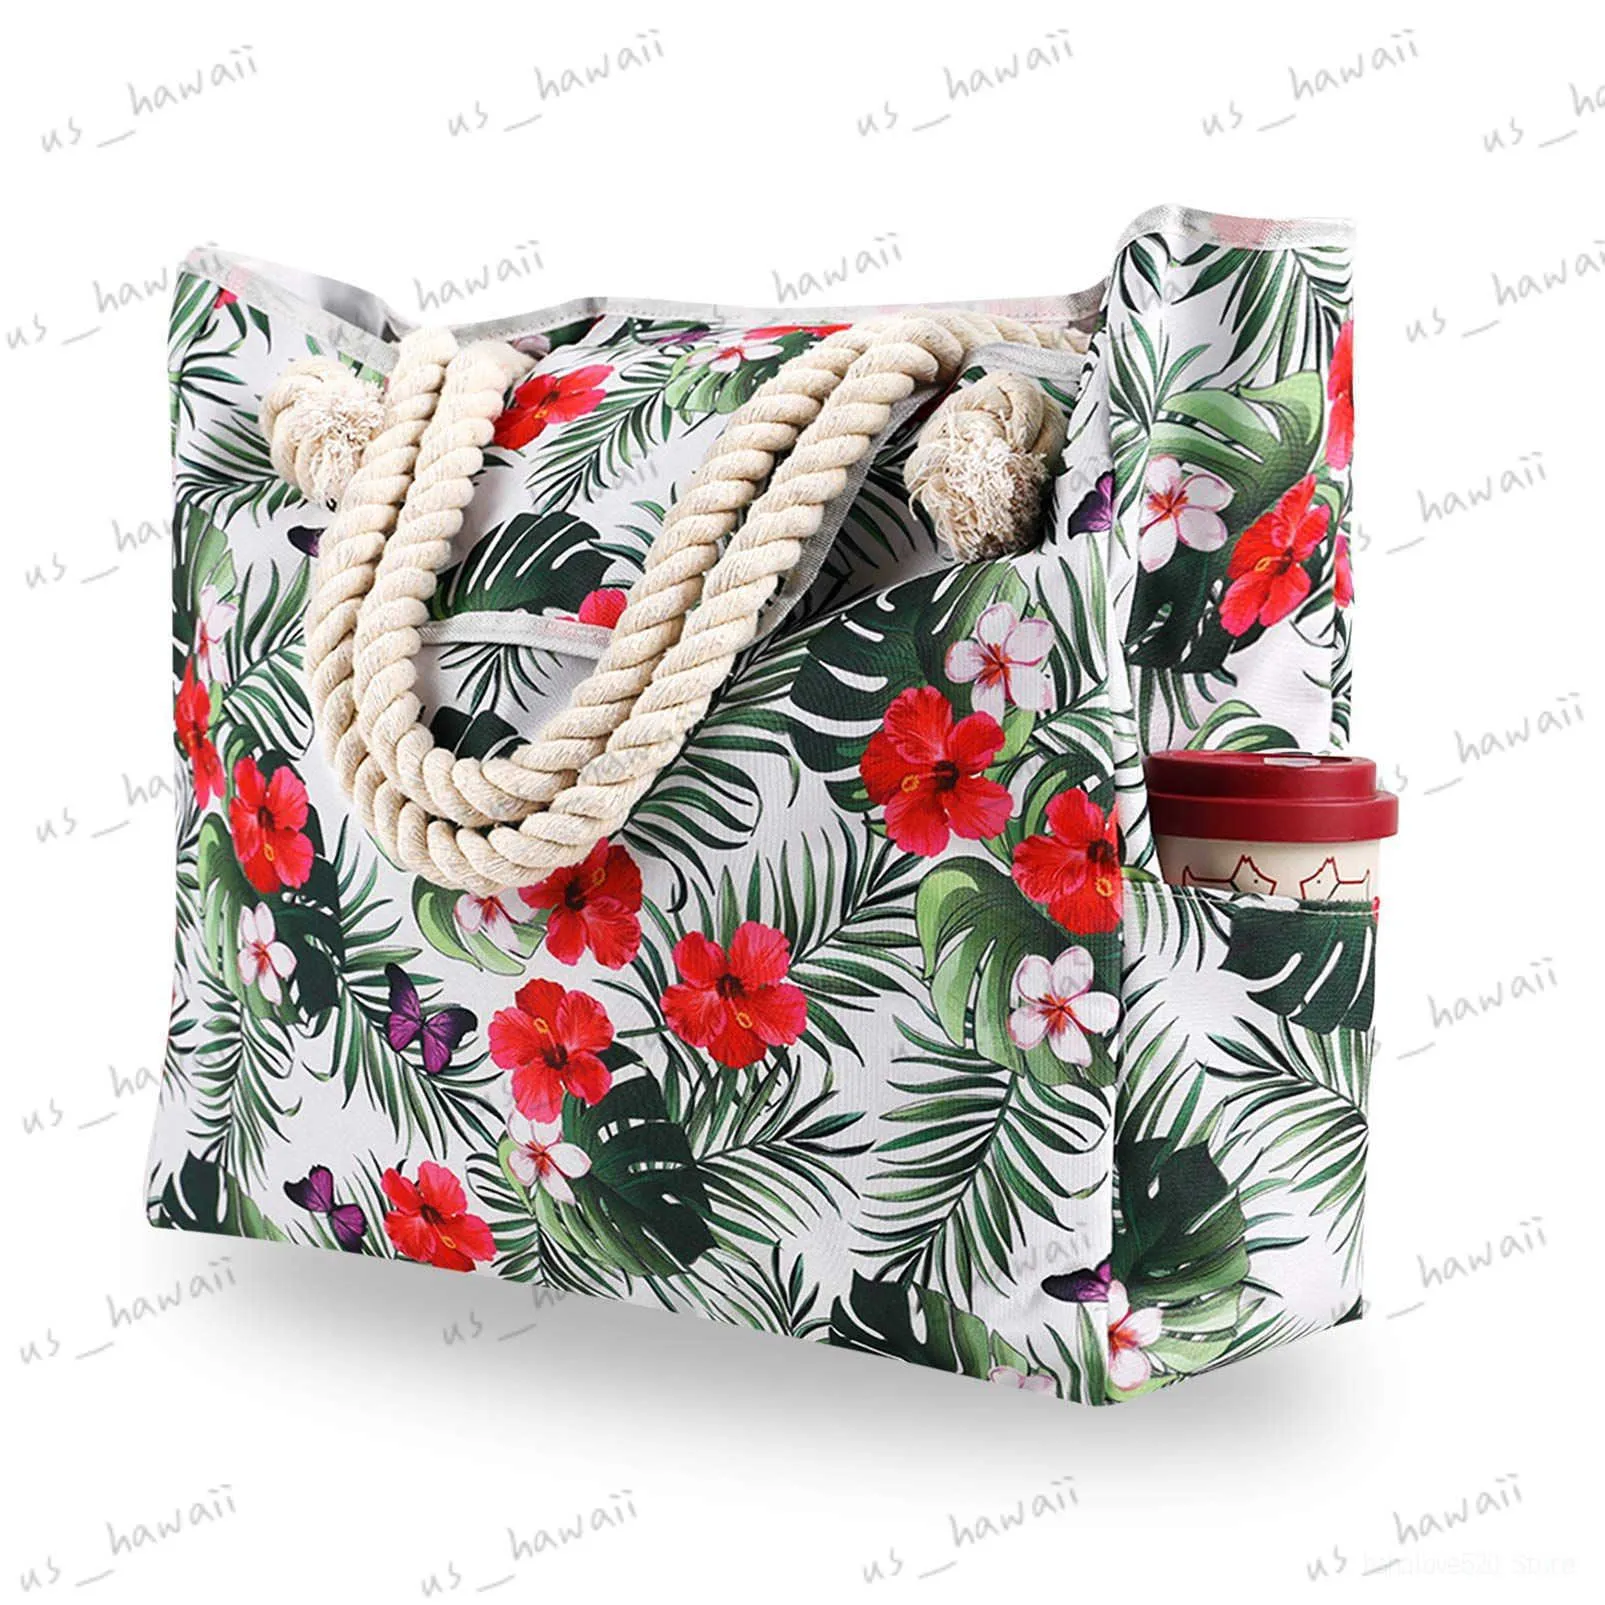 Evening Bags Large Capacity Beach Bag Fitness Rope Tote Bags Summer Holiday Fashion Stripes Floral Waterproof Oxford Big Size Shoulder Bag T230508